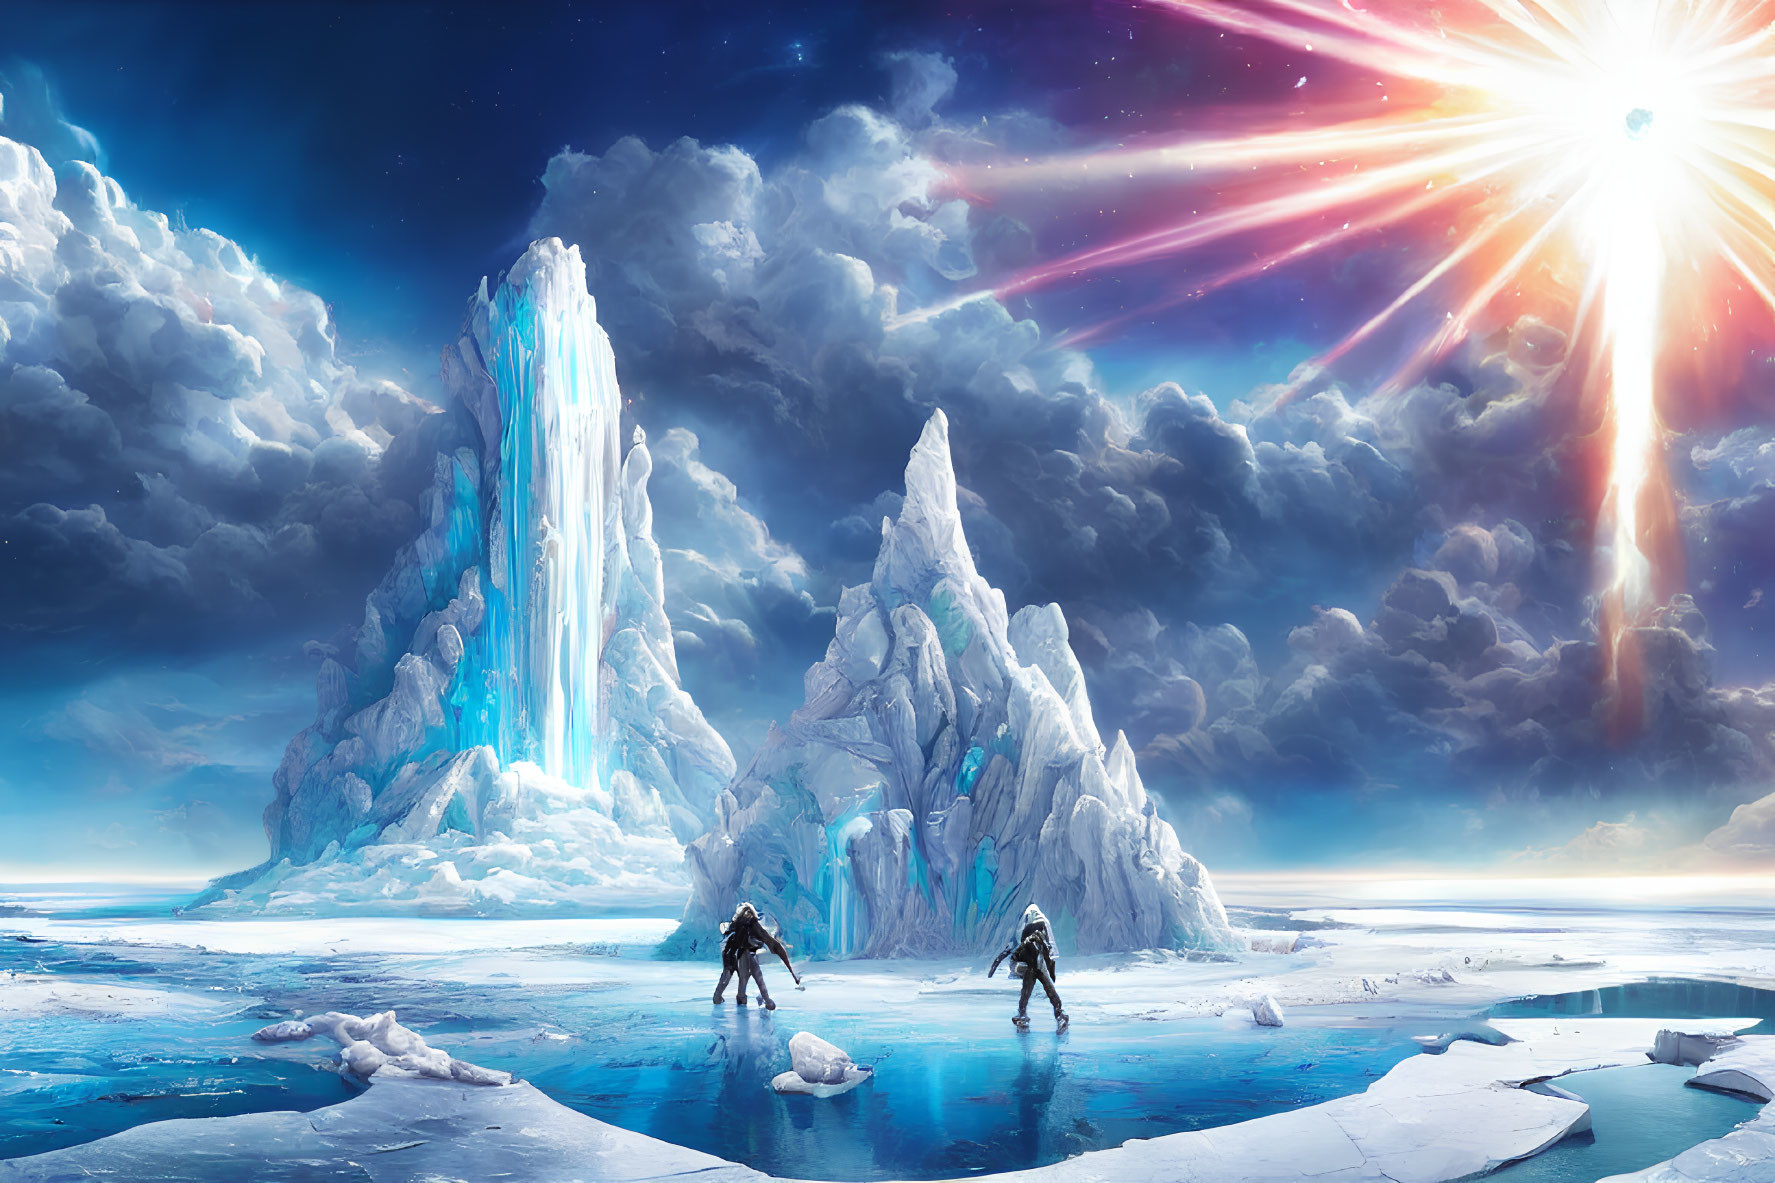 Icy Landscape with Glaciers, Figures, and Radiant Star